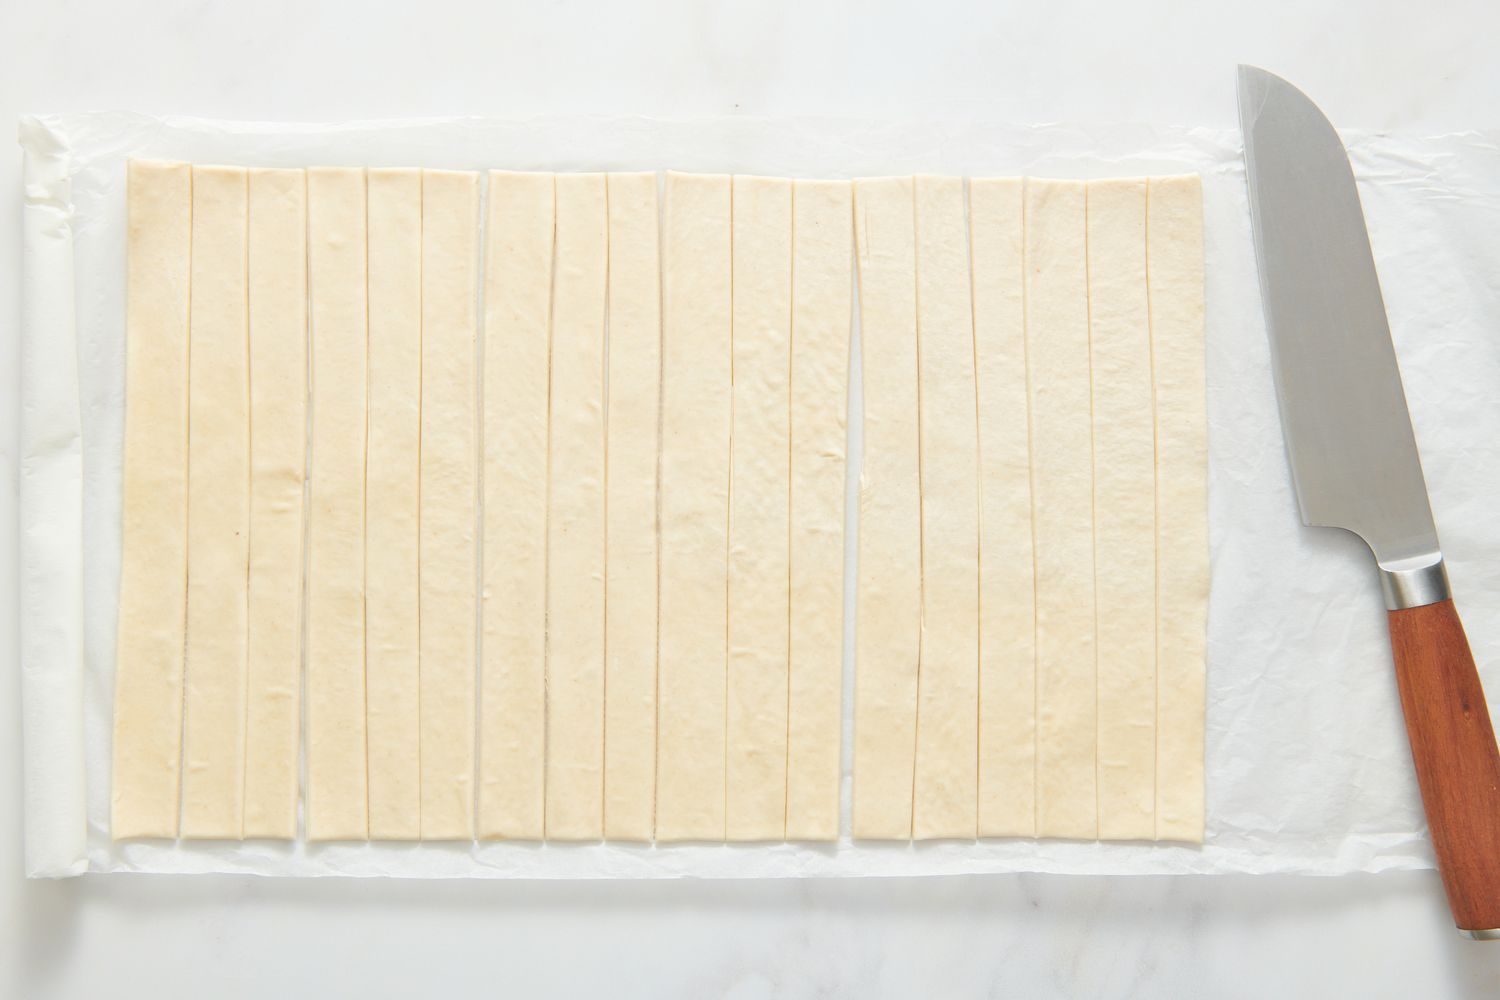 A sheet of puff pastry cut into thin slices